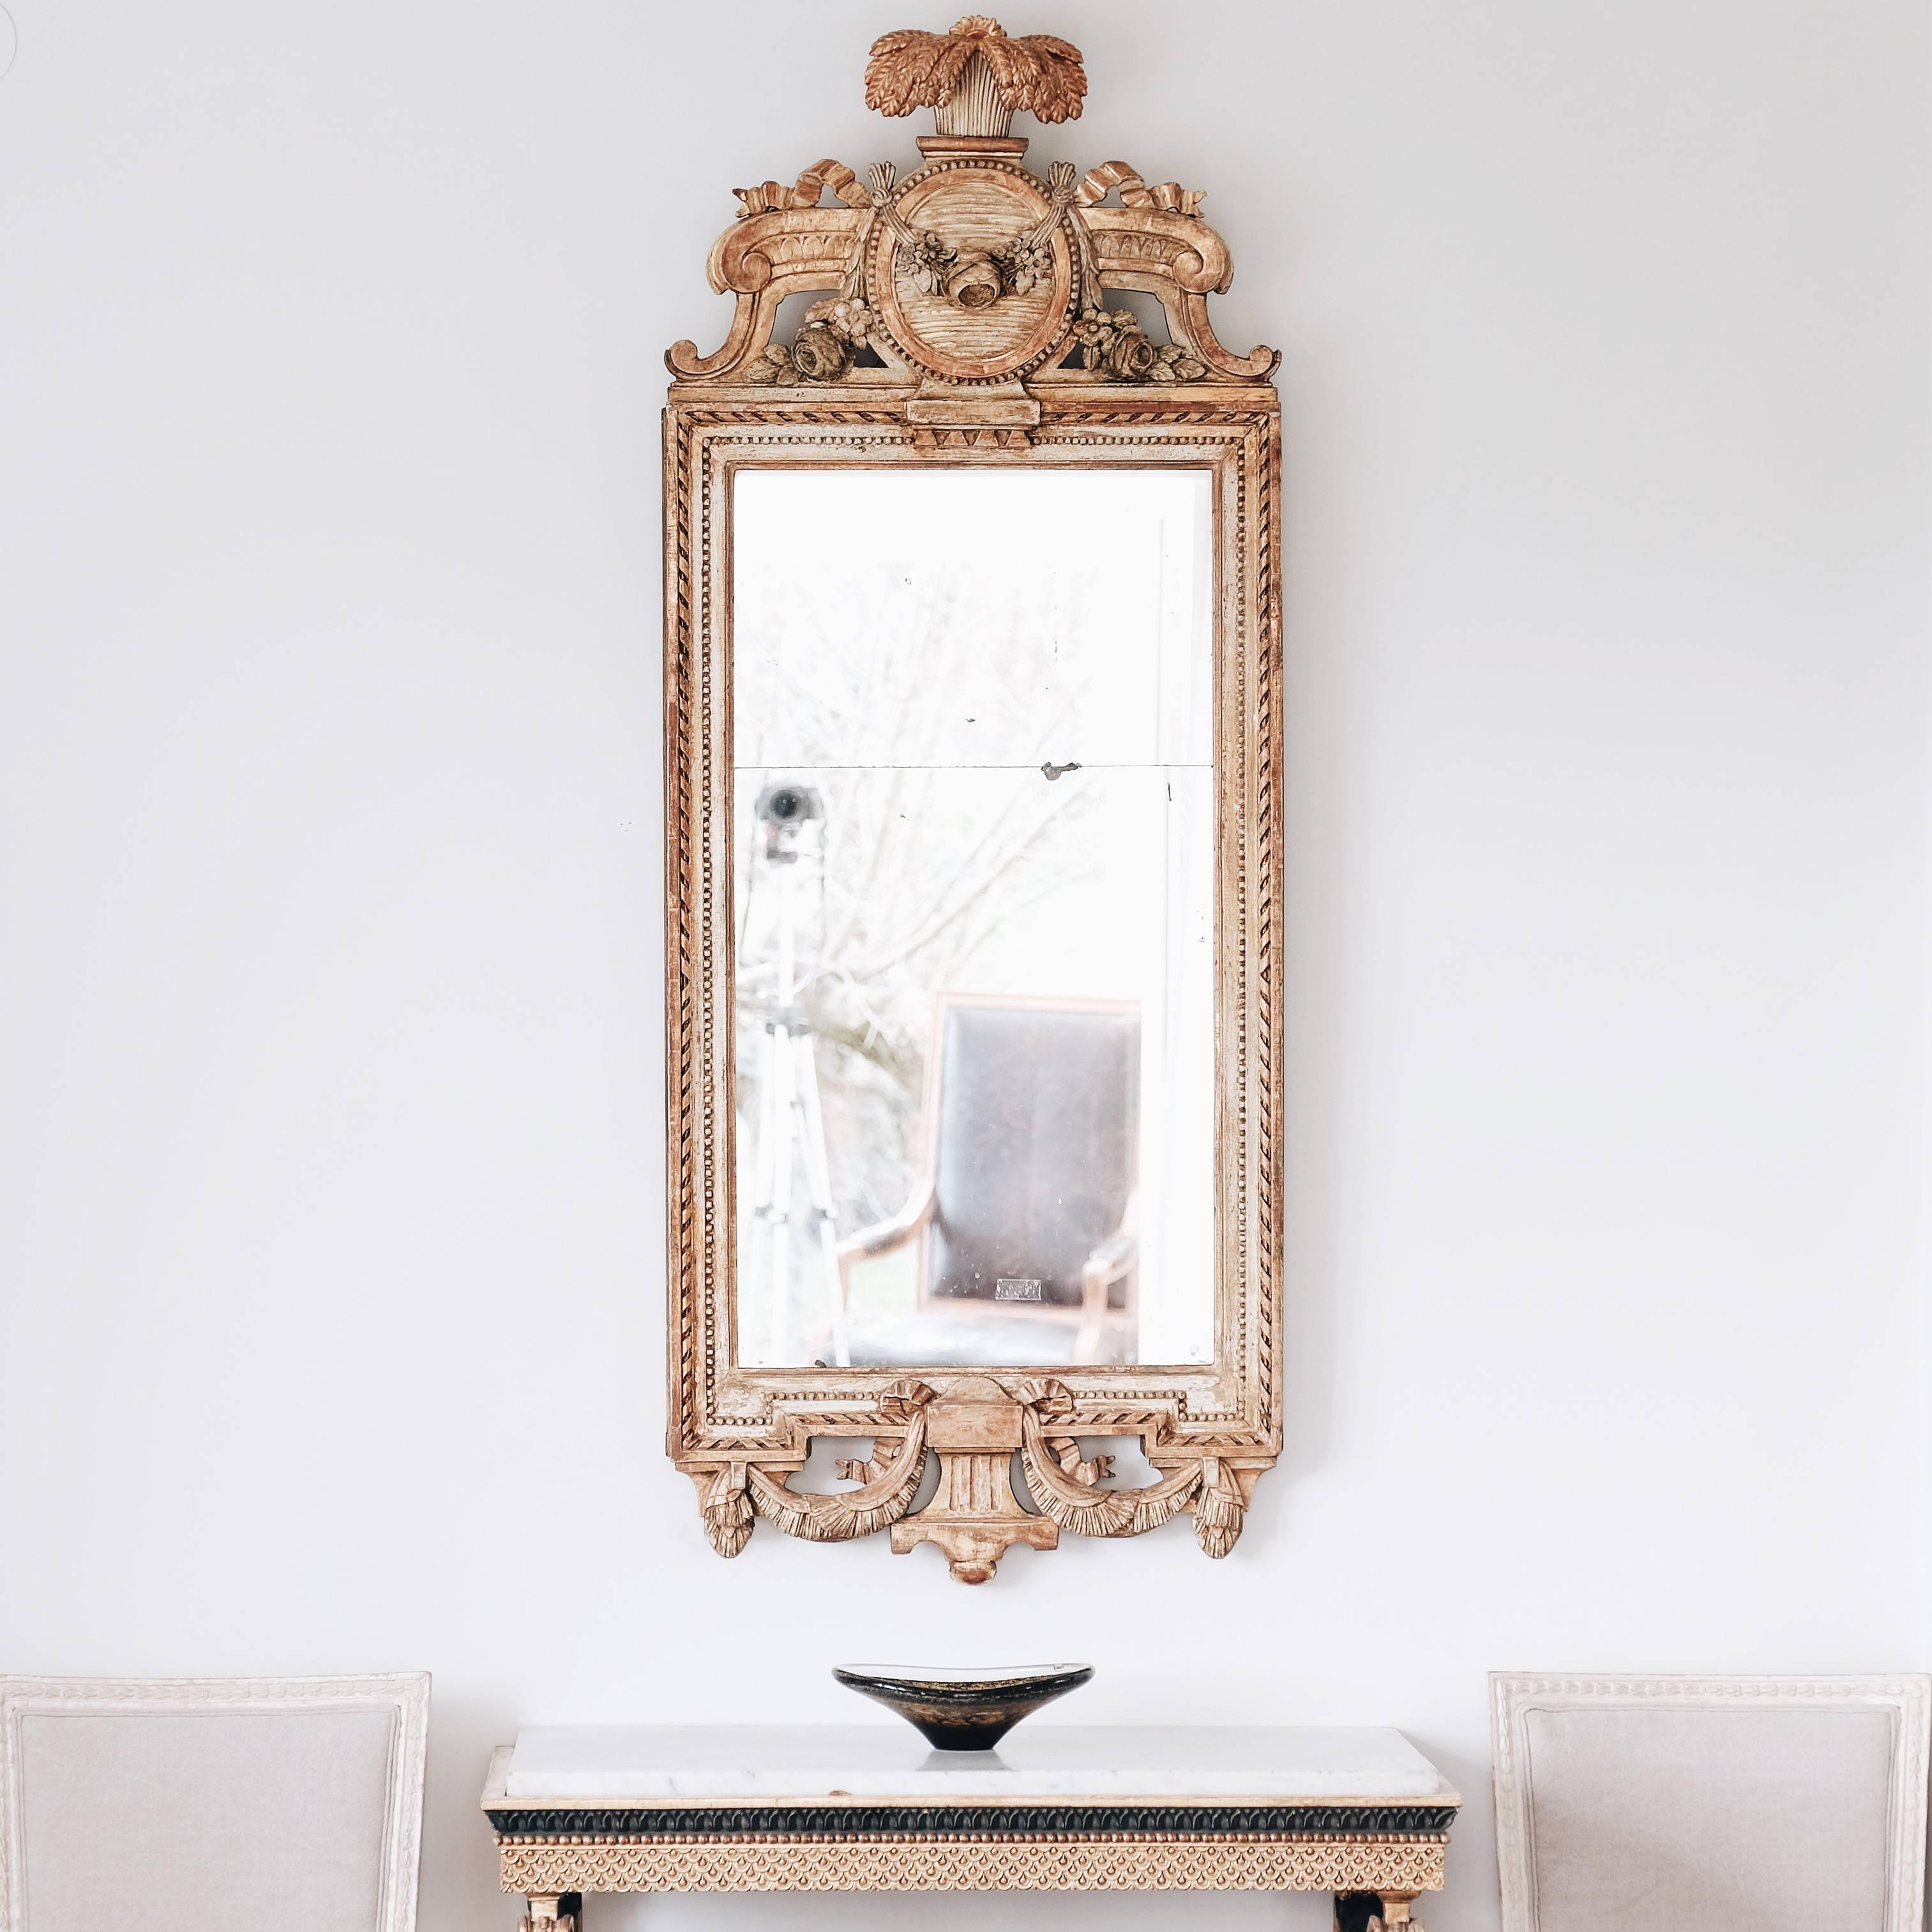 Unusually large and impressive 18th century Swedish Gustavian giltwood mirror. Signed by master mirror maker Johan åkerblad (1728-1799). With original mirror glass and gilt showing great patina, circa 1790.

Good condition with wear consistent